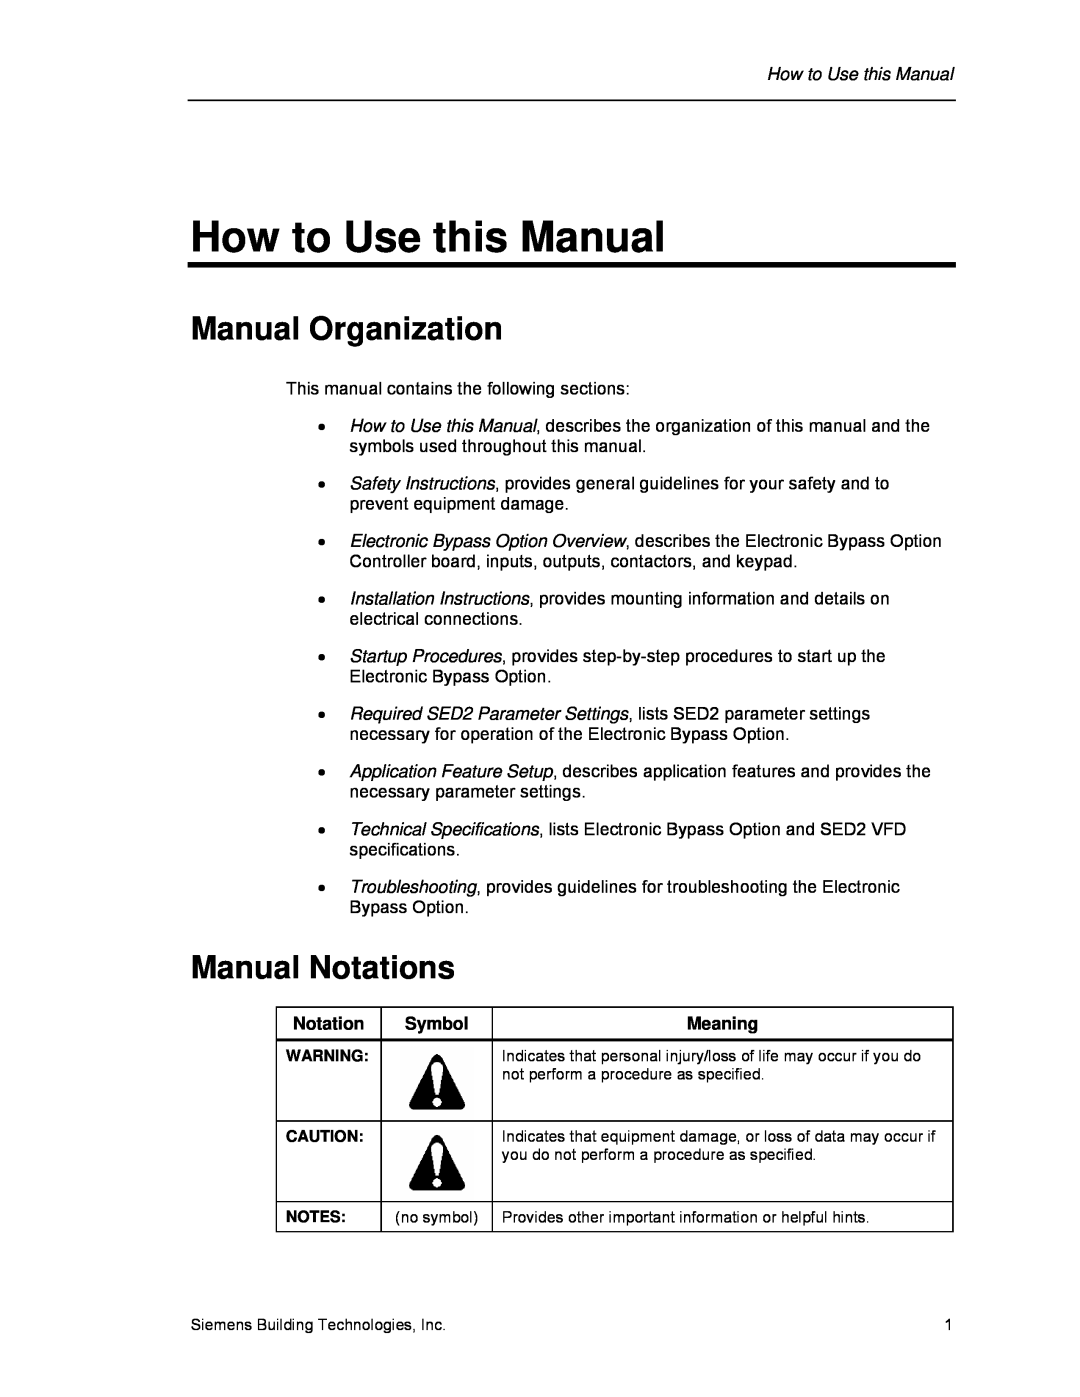 Siemens 125-3208 operating instructions How to Use this Manual, Manual Organization, Manual Notations 